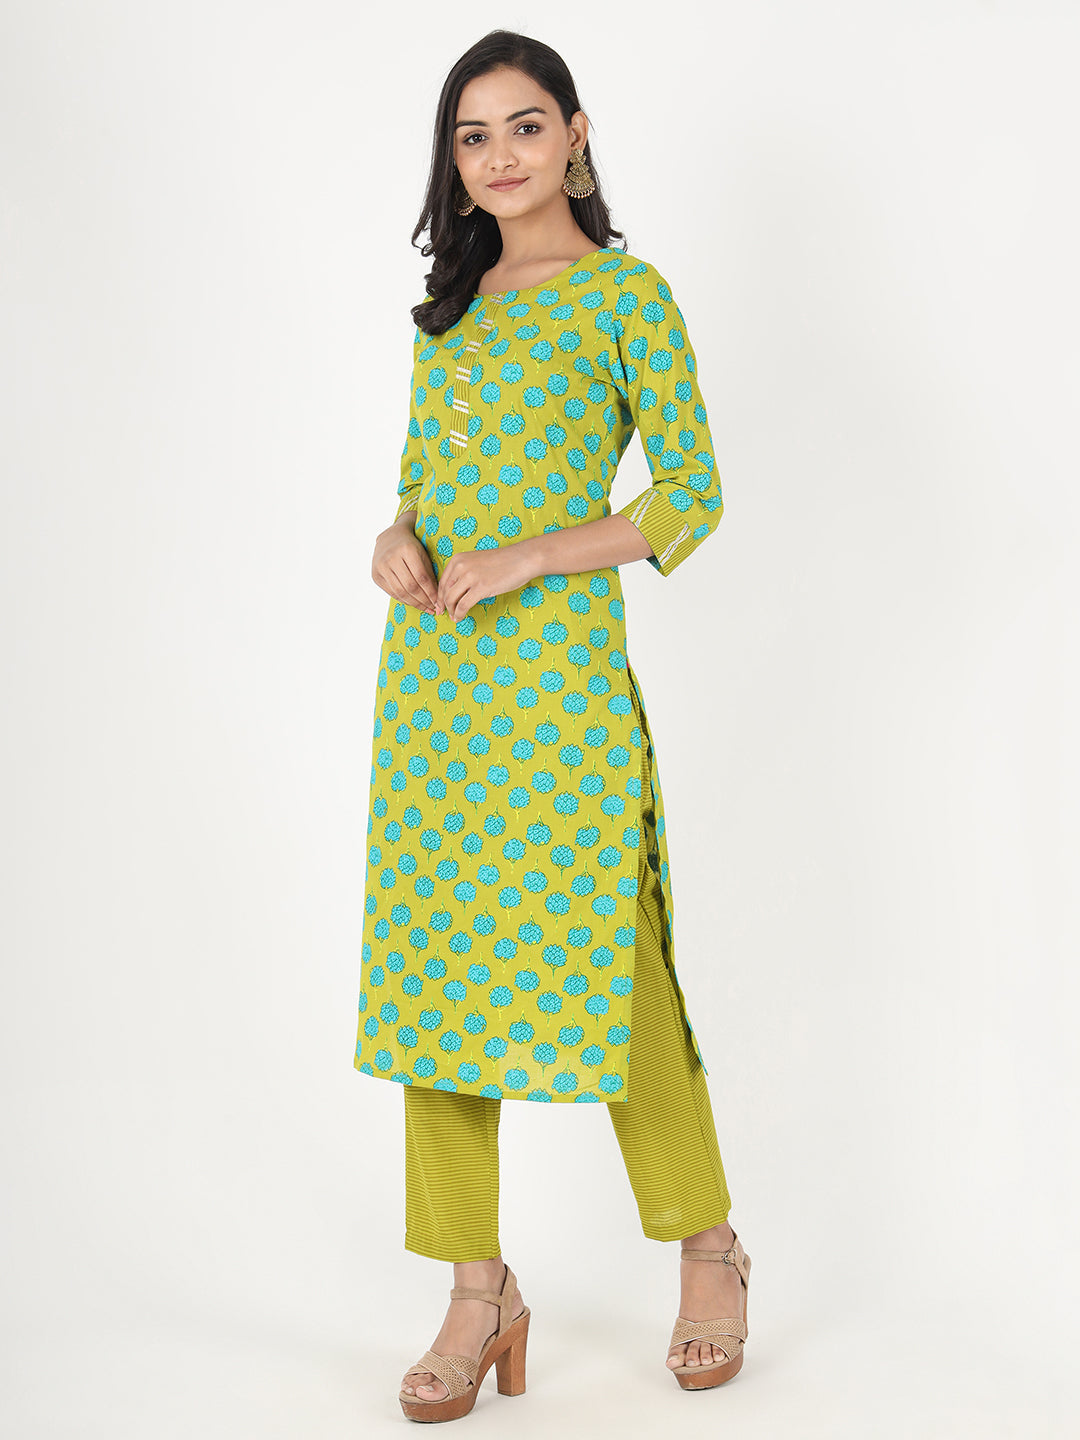 Rayon designer Kurti Pants dress for an ethnic look in summers - Shop online  women fashion, indo-western, ethnic wear, sari, suits, kurtis, watches,  gifts.